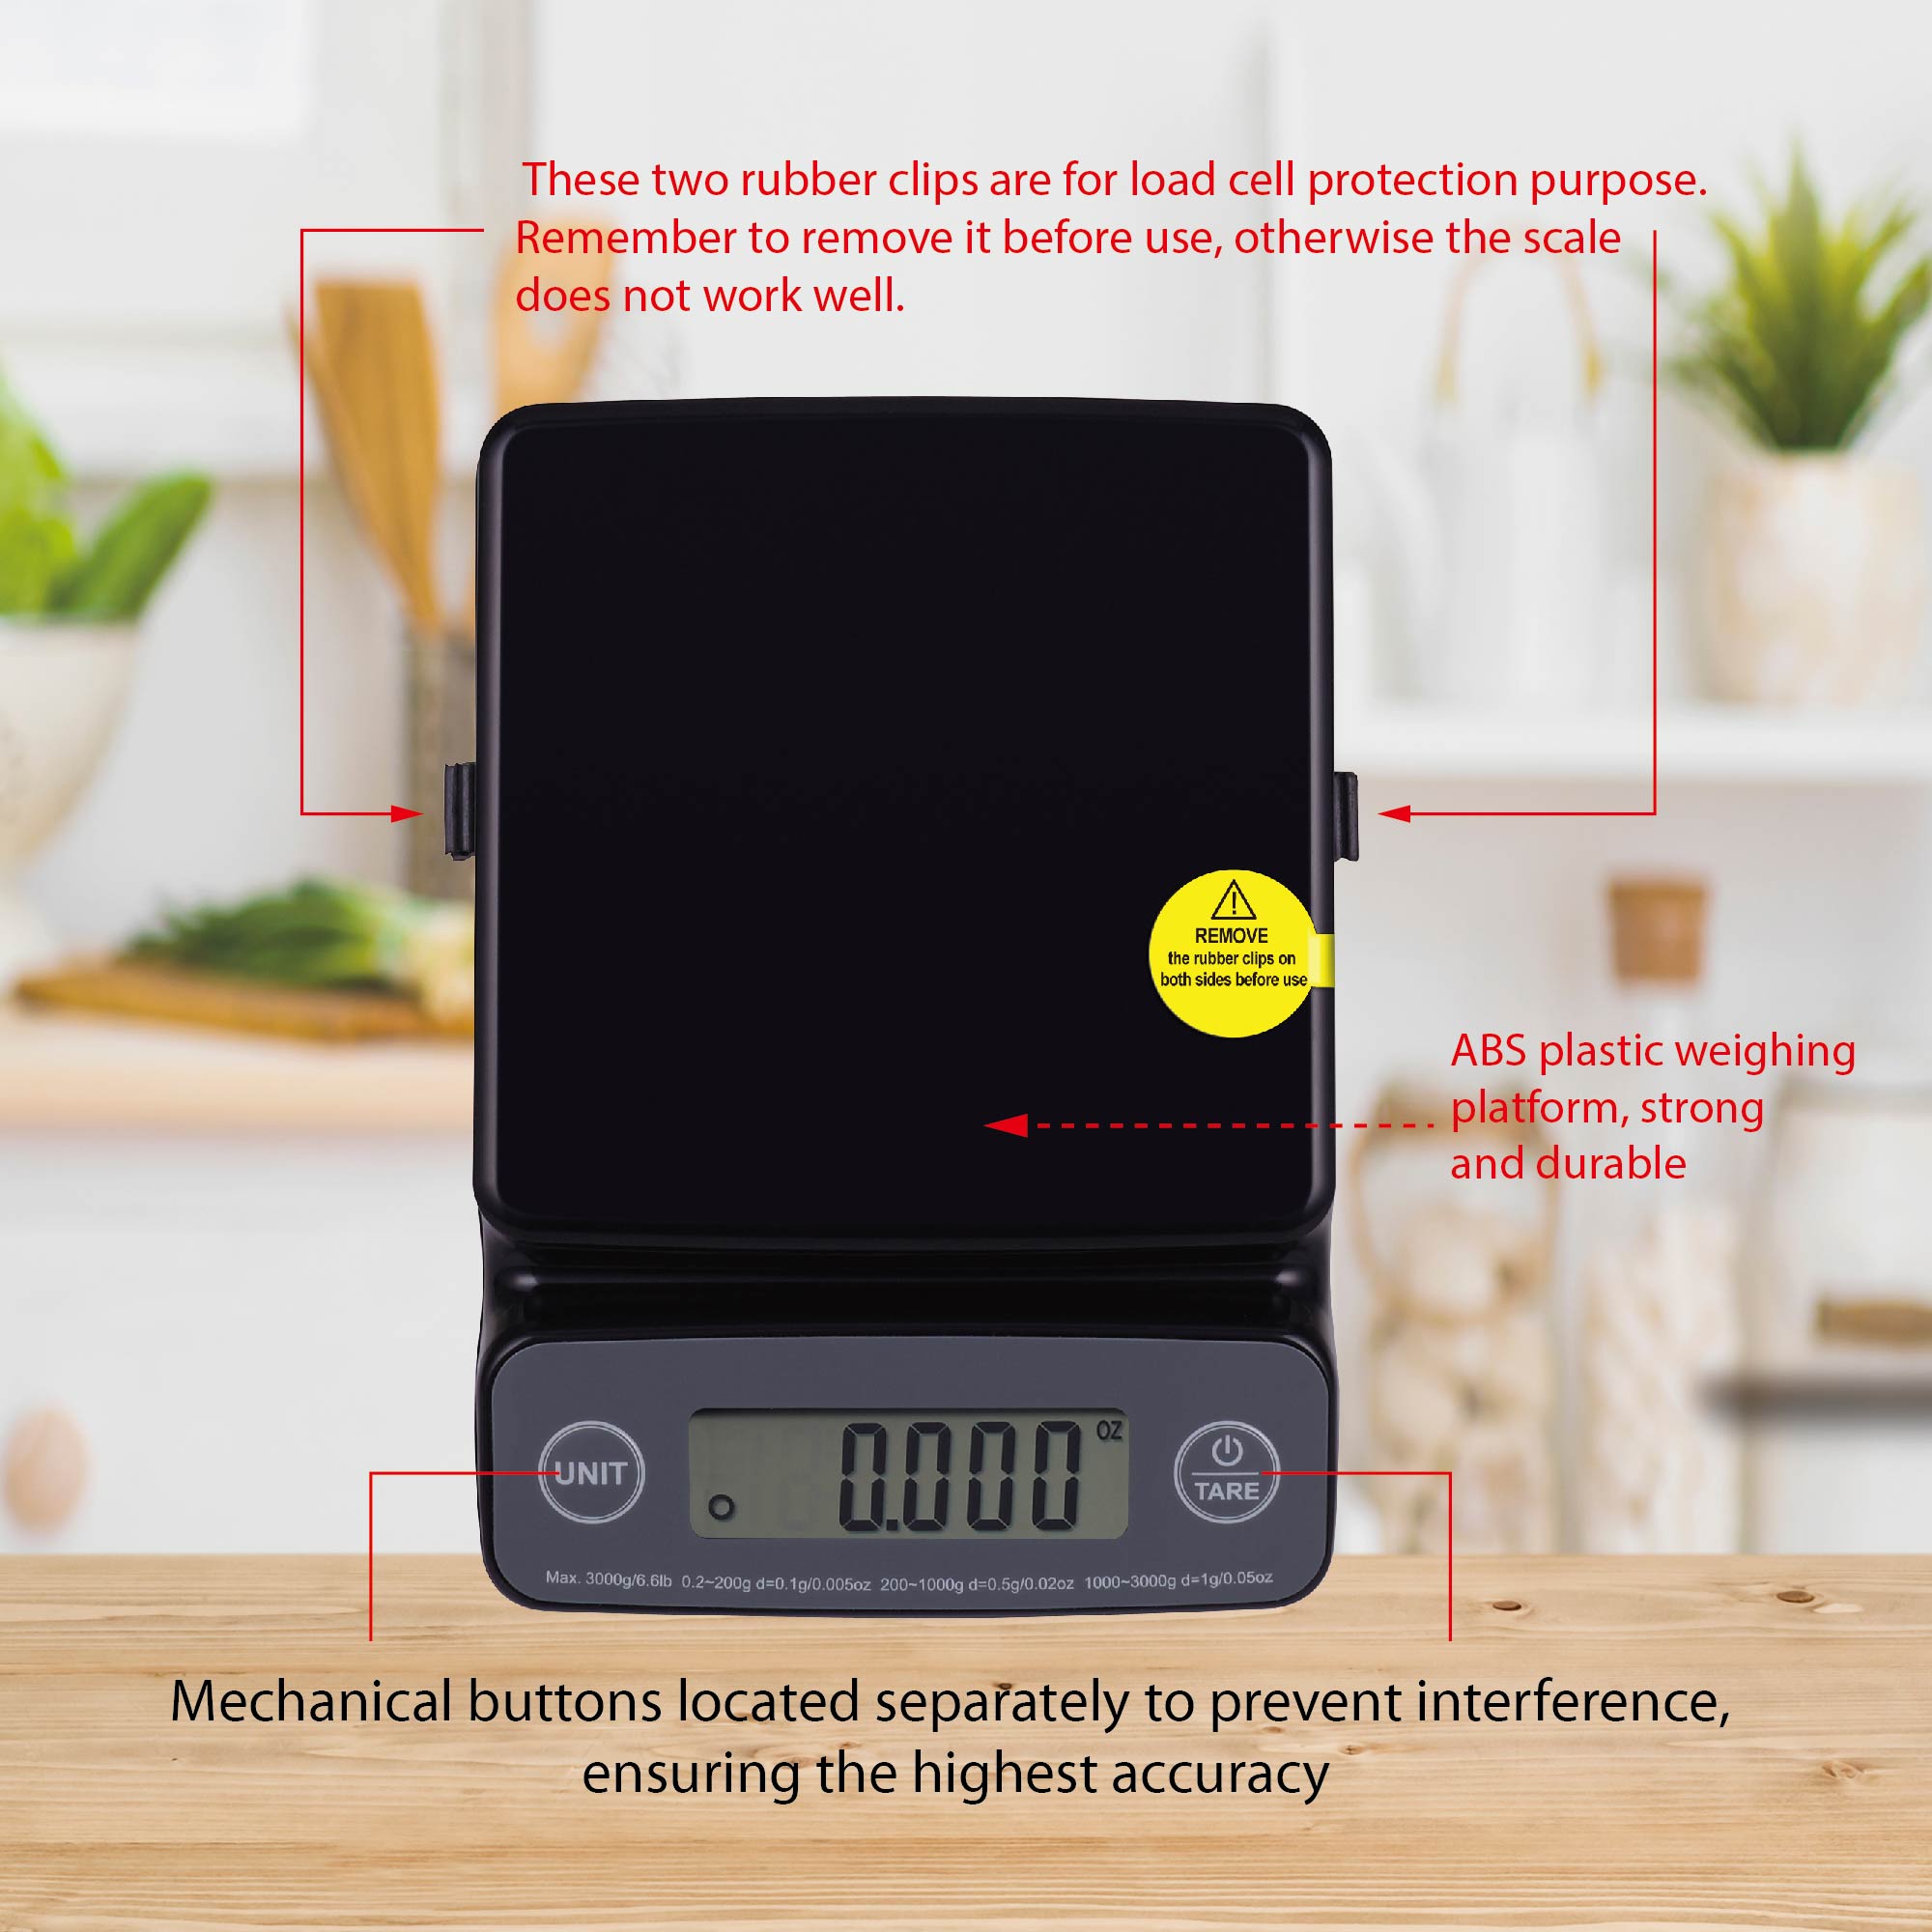 Mainstays High Precision Digital Kitchen Scale, Black - image 3 of 12